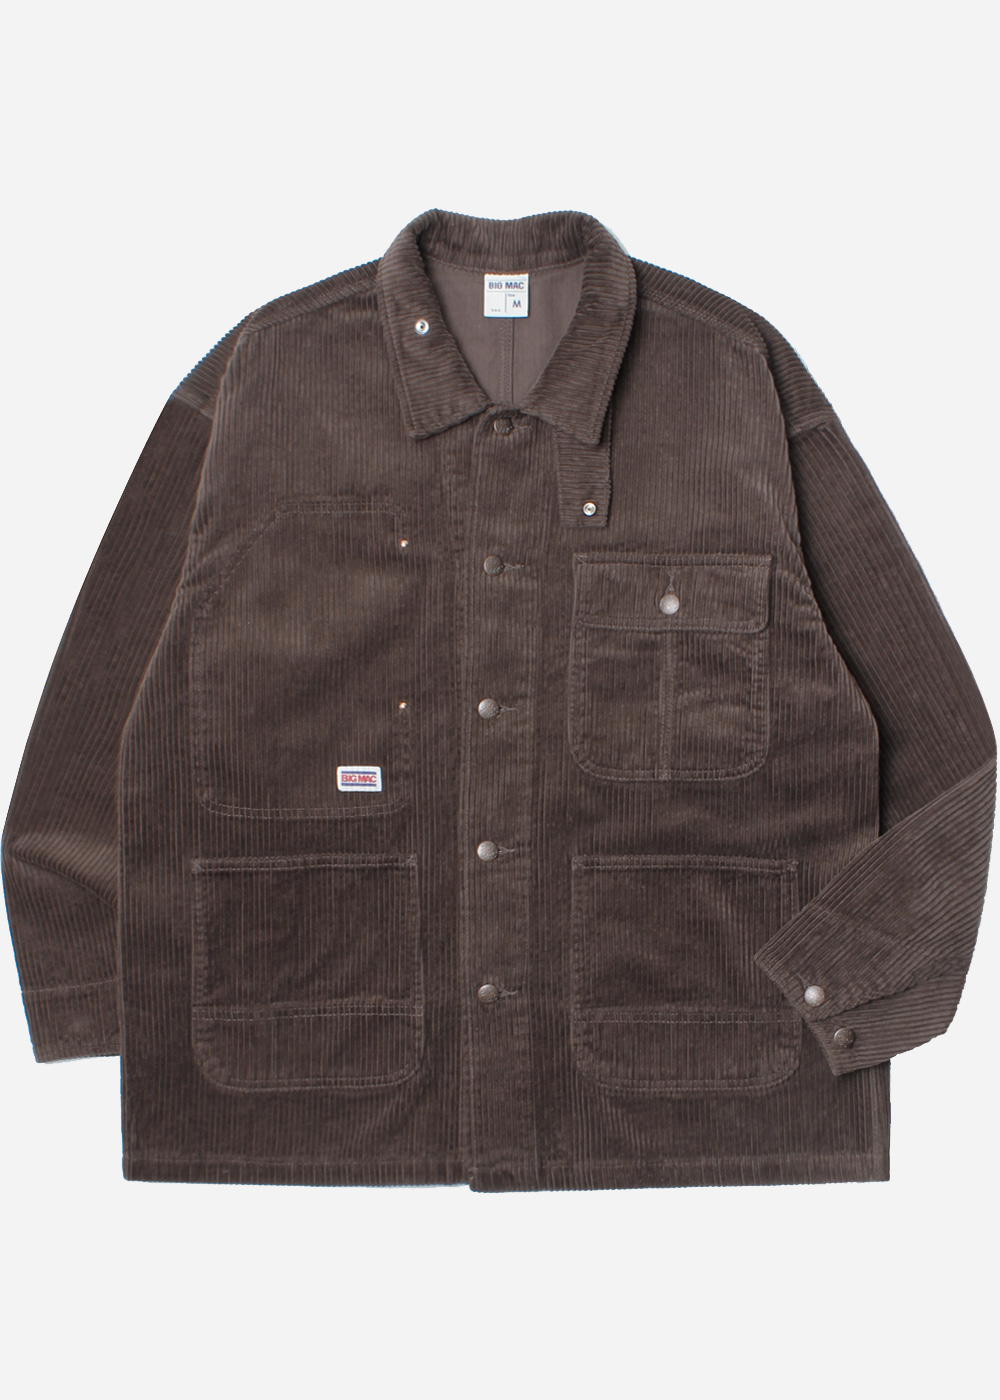 BIG MAC X FREAK’S STORE’over fit’corduroy work coverall